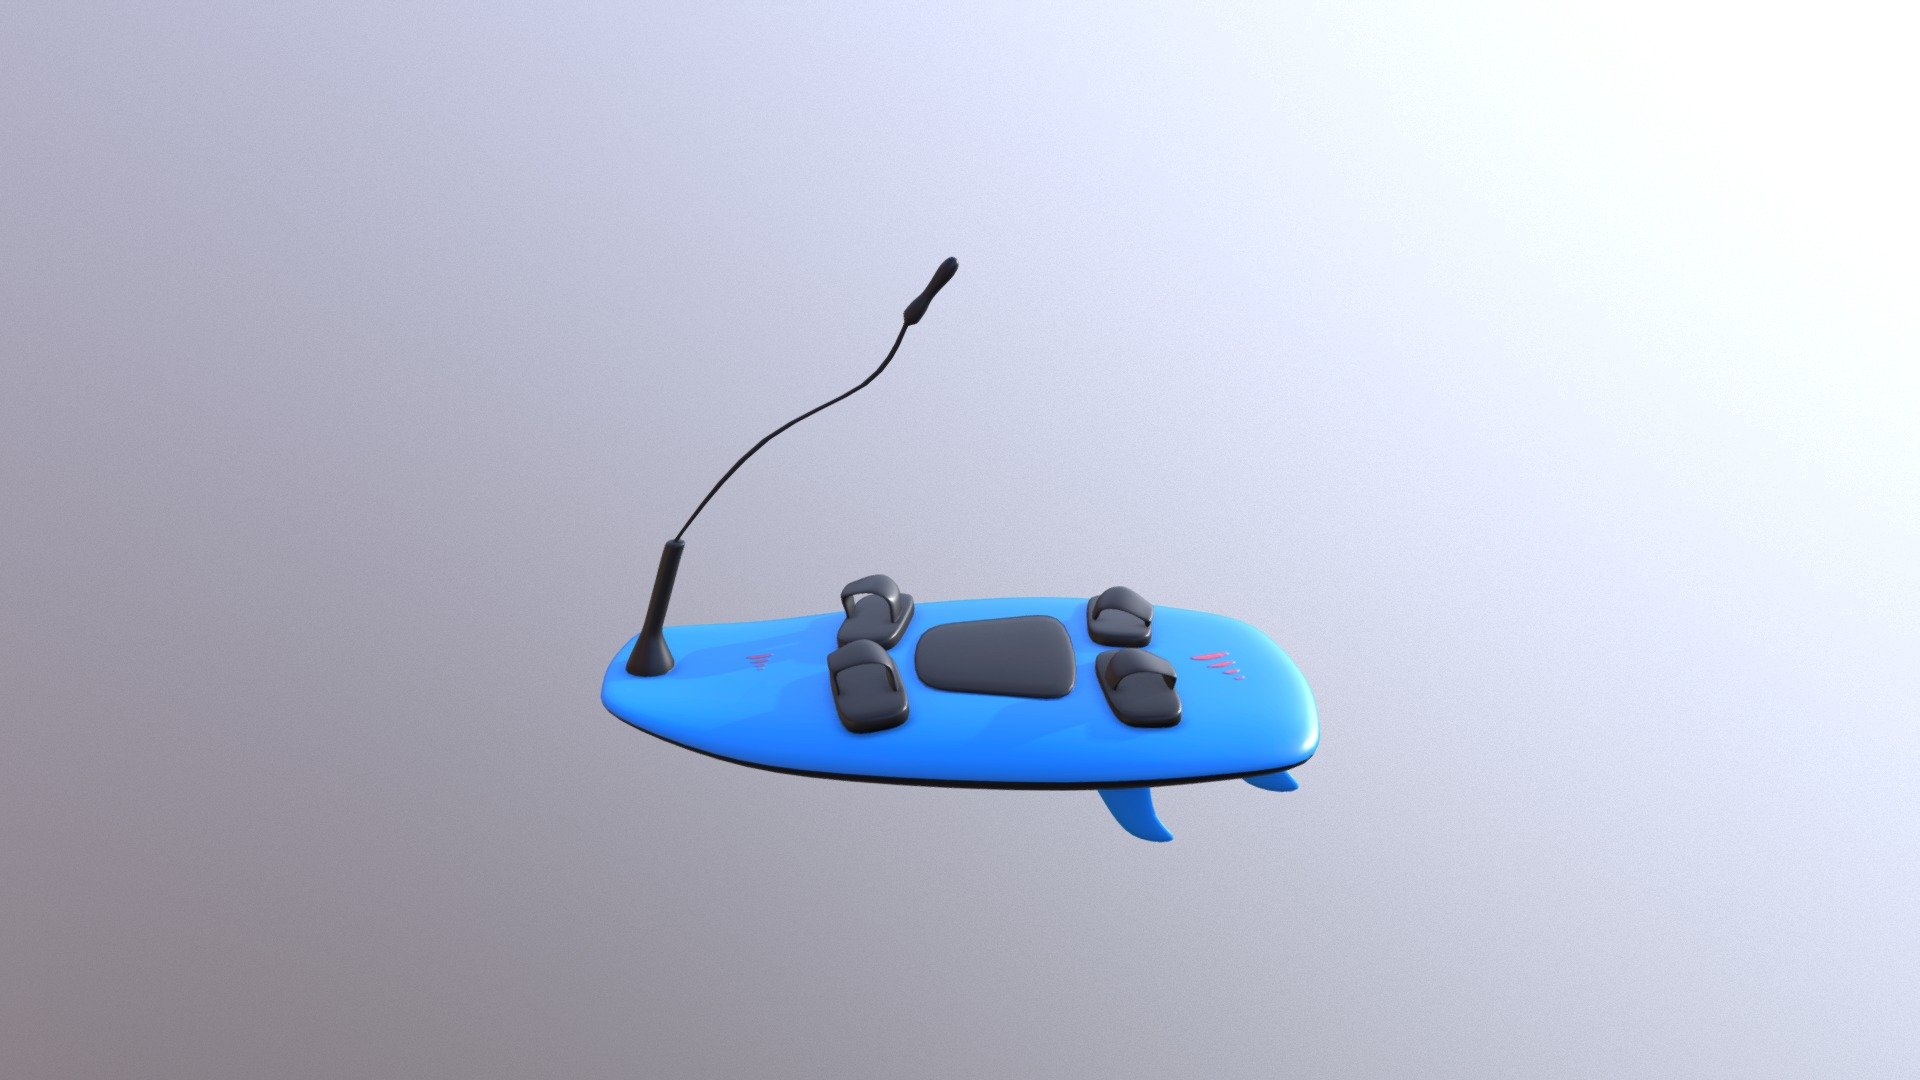 Gasoline powered personal jet surf for catching some funky wave&hellip; - JetSurf - 3D model by Nico.Law 3d model